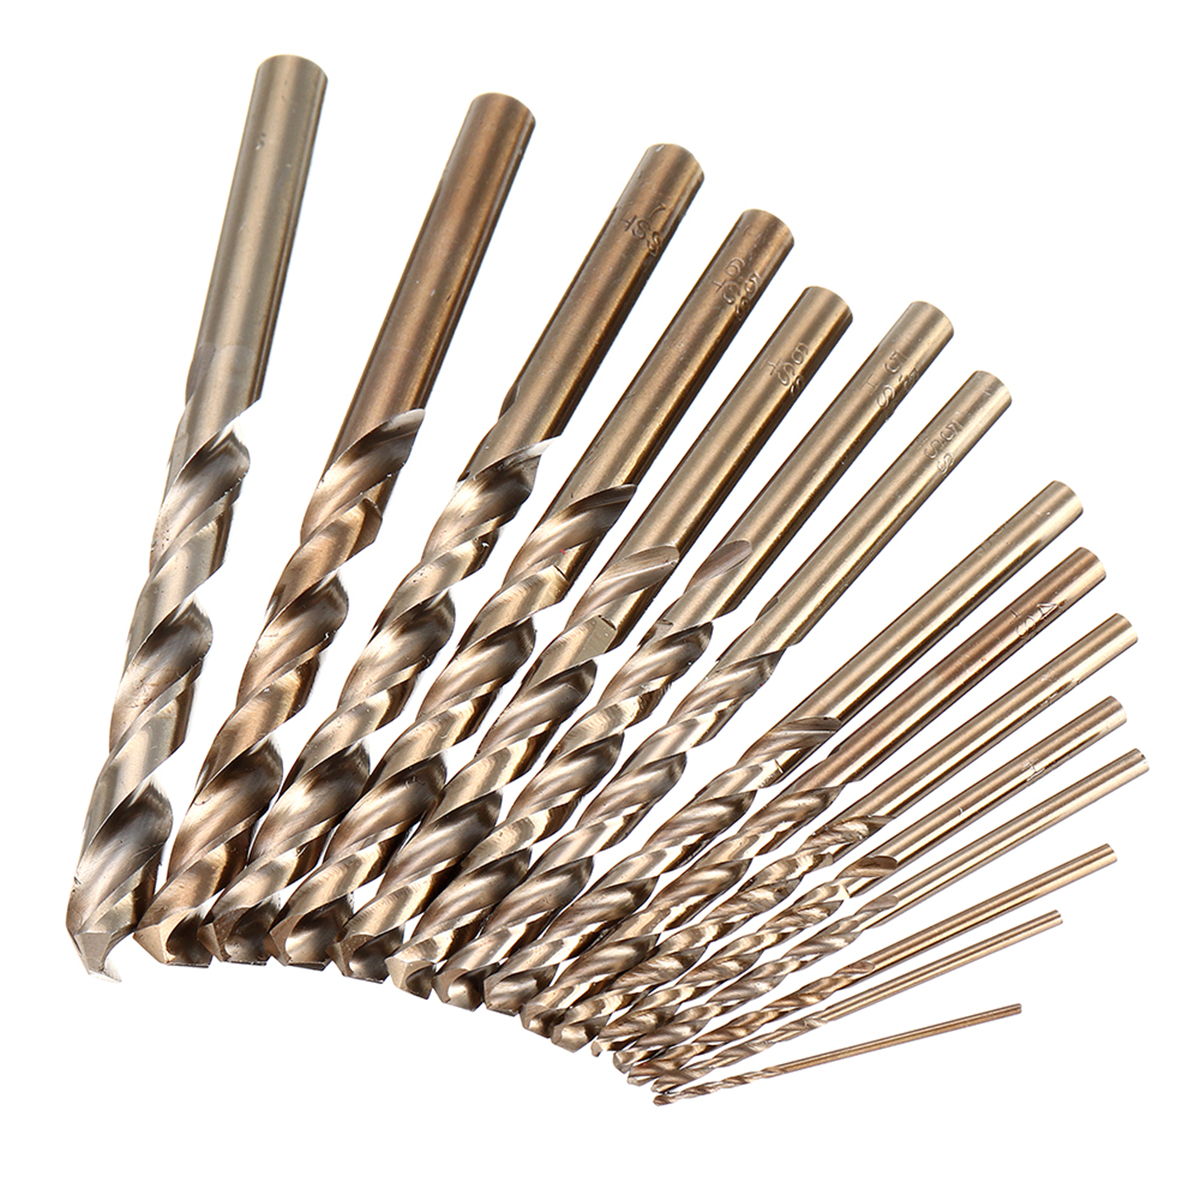 Find 13/19/25 PCS HSS 1-13mm Drillpro M35 Bit Set Cobalt Twist Drill Bit for Sale on Gipsybee.com with cryptocurrencies